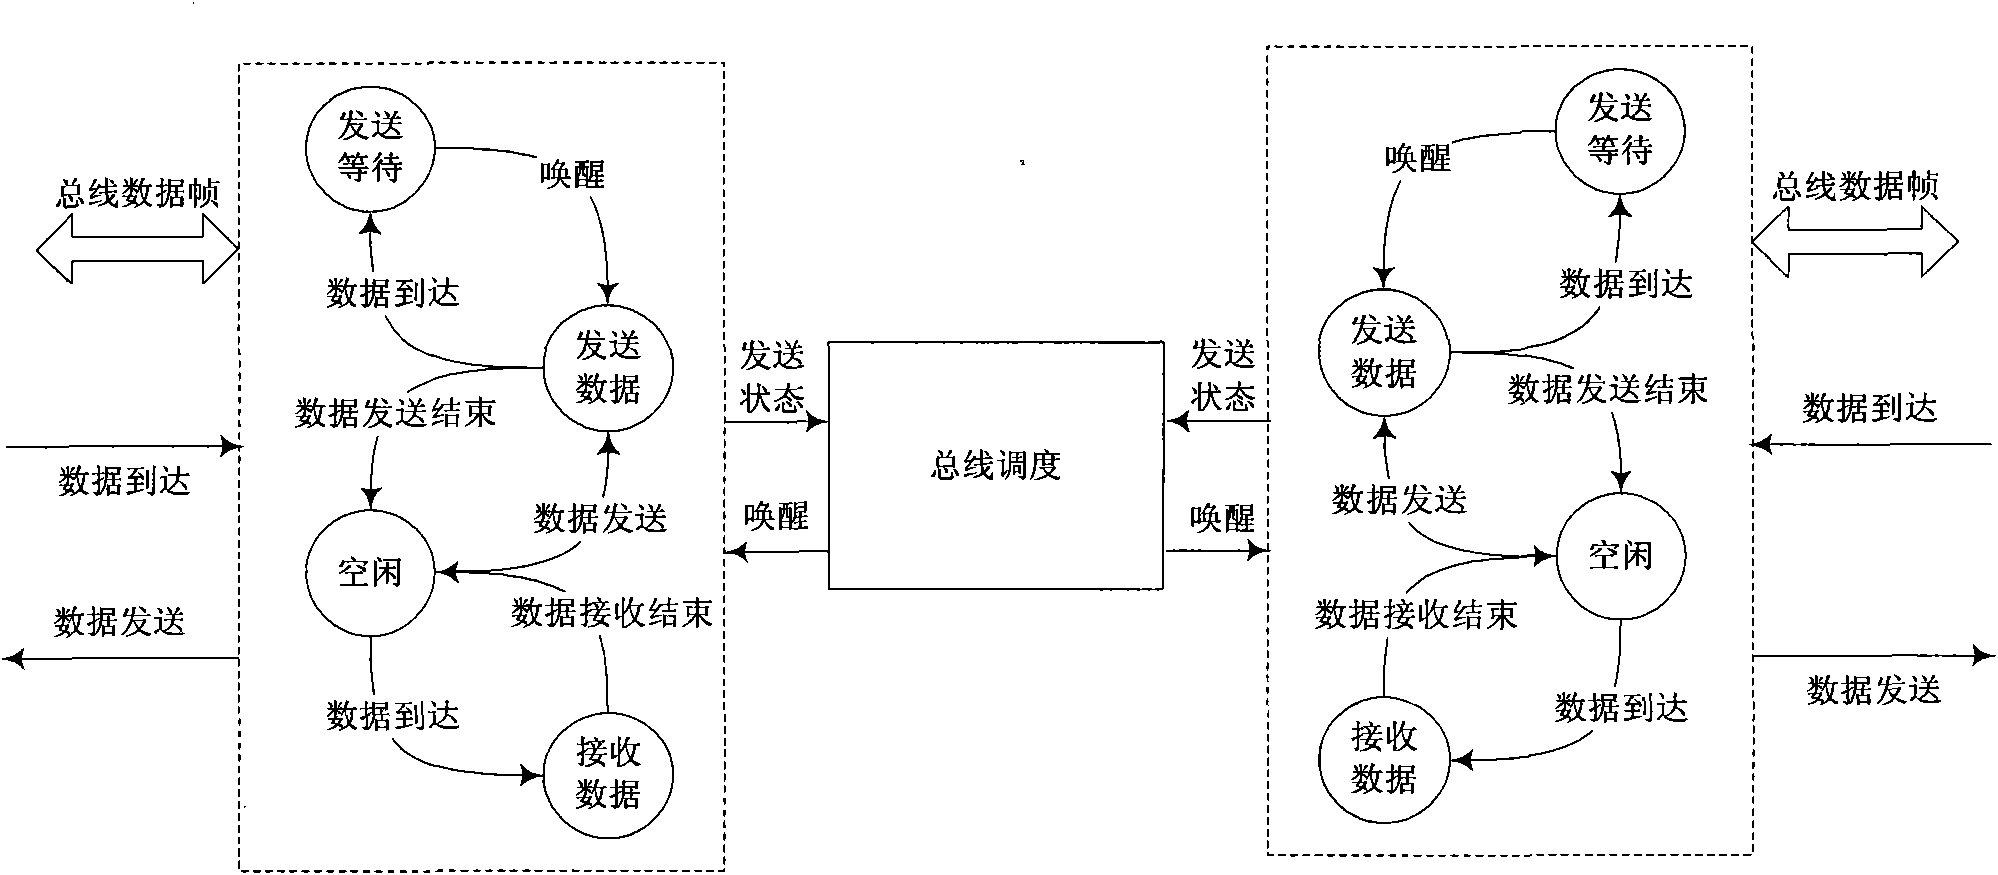 Interface method of USB 1.1 bus and high-speed intelligent unified bus